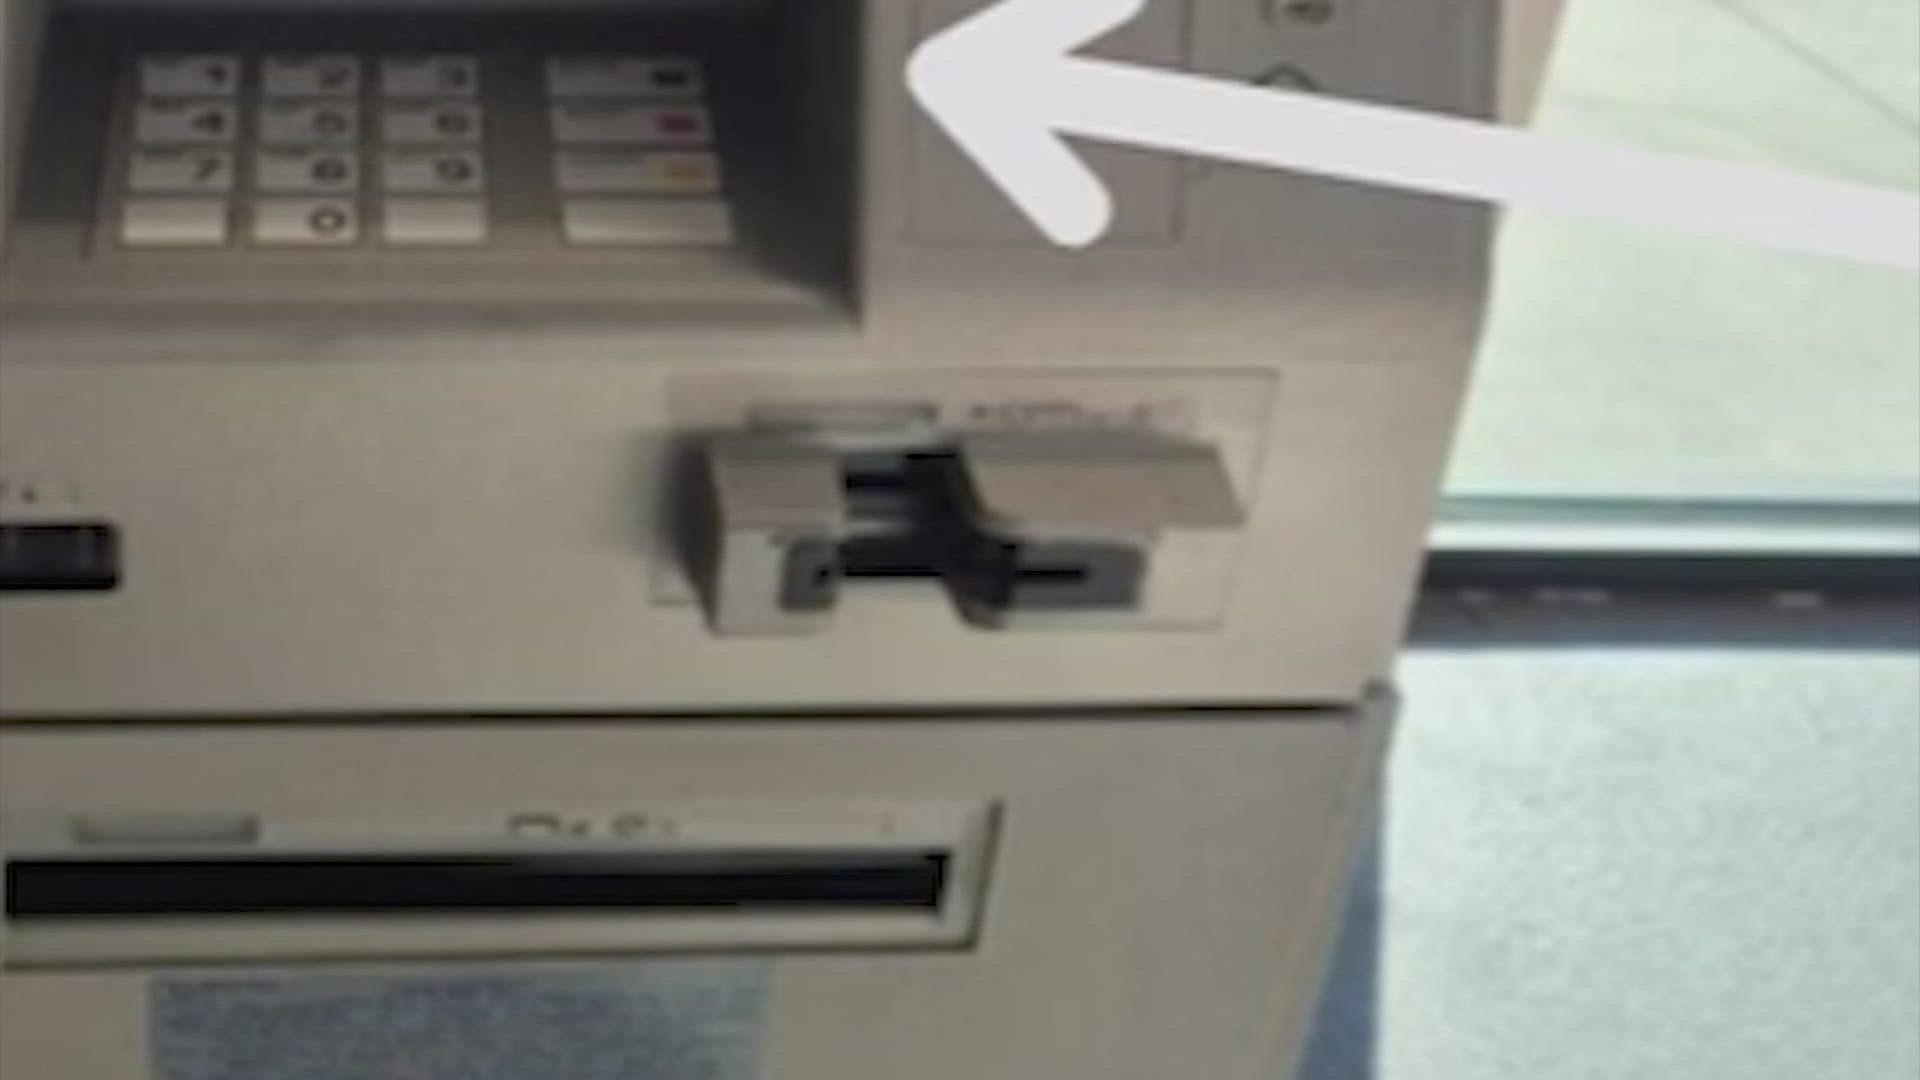 Both Pasadena police and the Better Business Bureau of Greater Houston said the use of skimmers is on the rise.